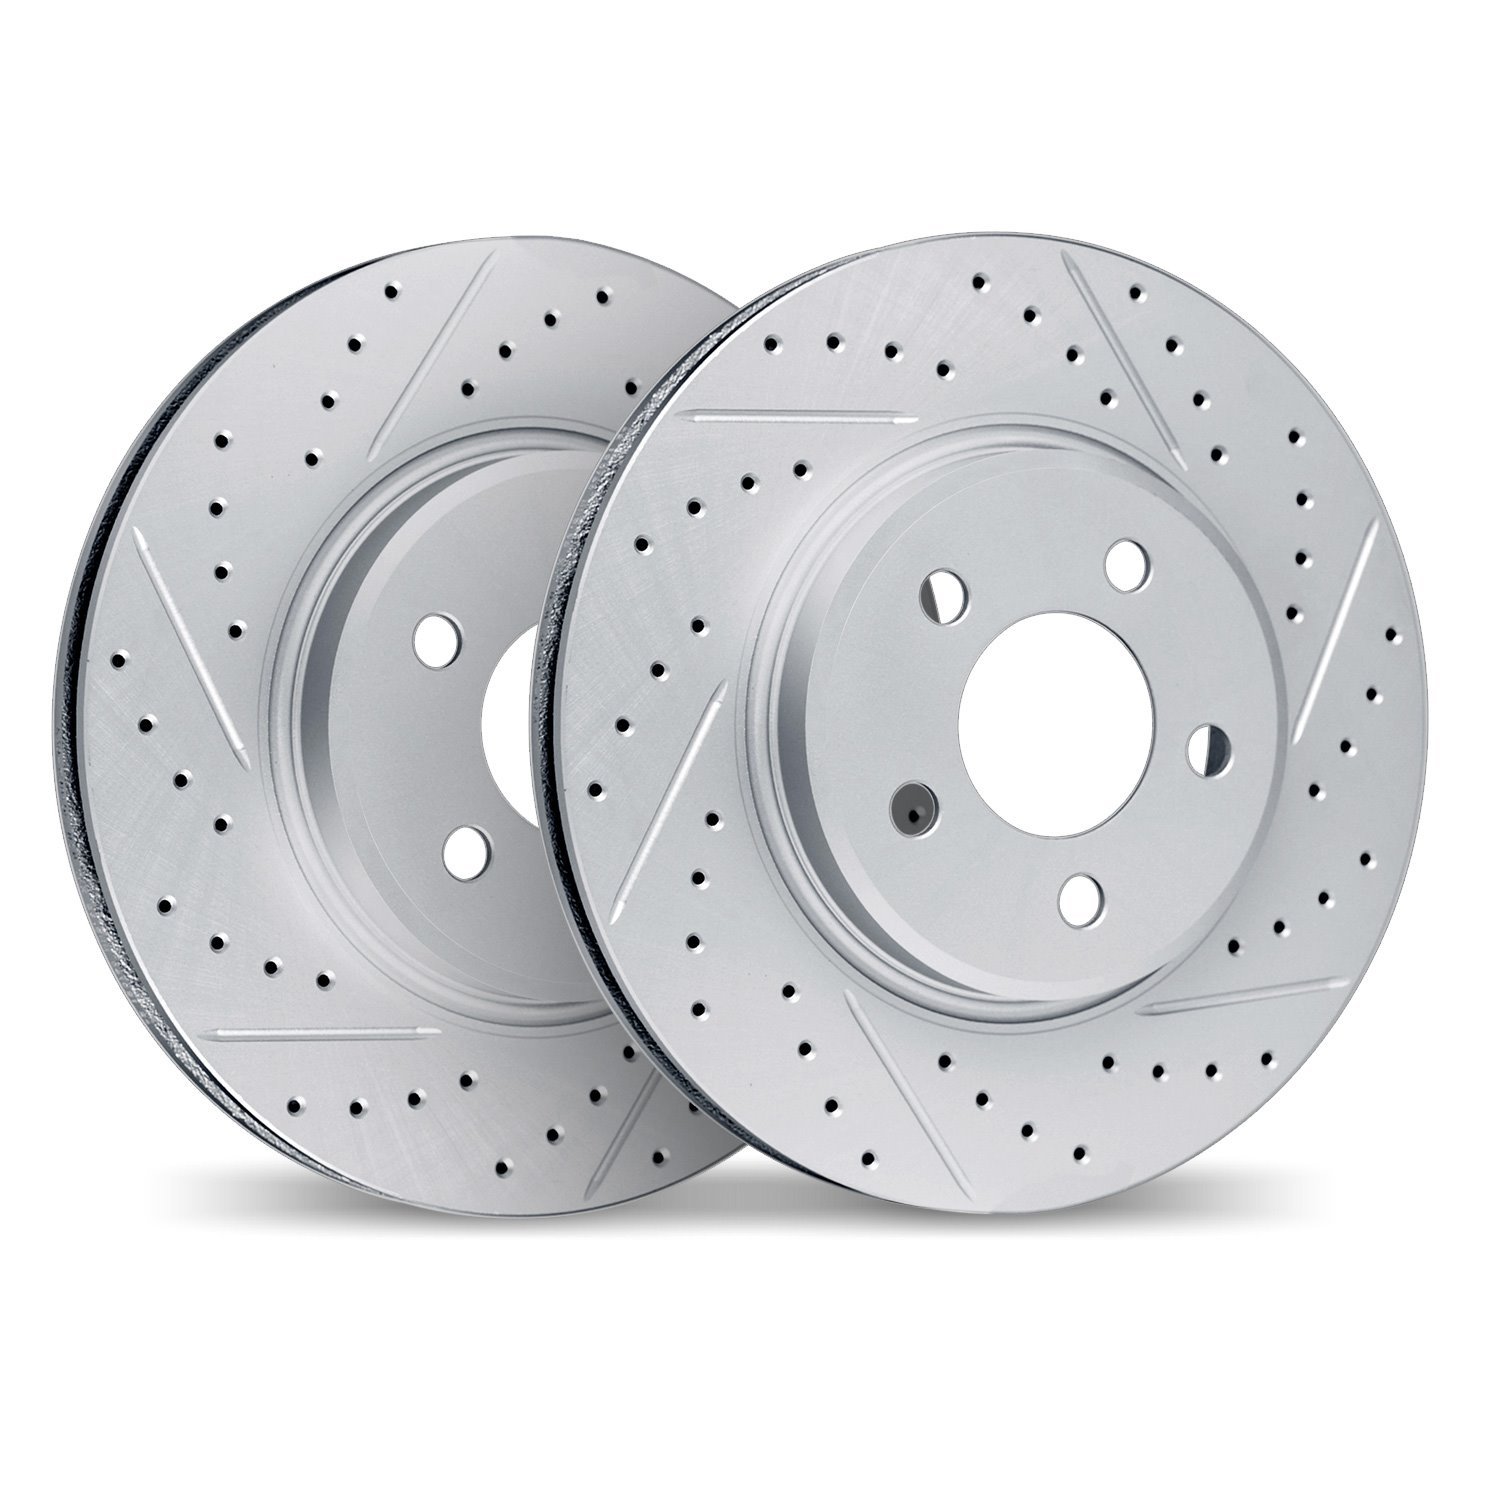 2002-11015 Geoperformance Drilled/Slotted Brake Rotors, Fits Select Land Rover, Position: Front